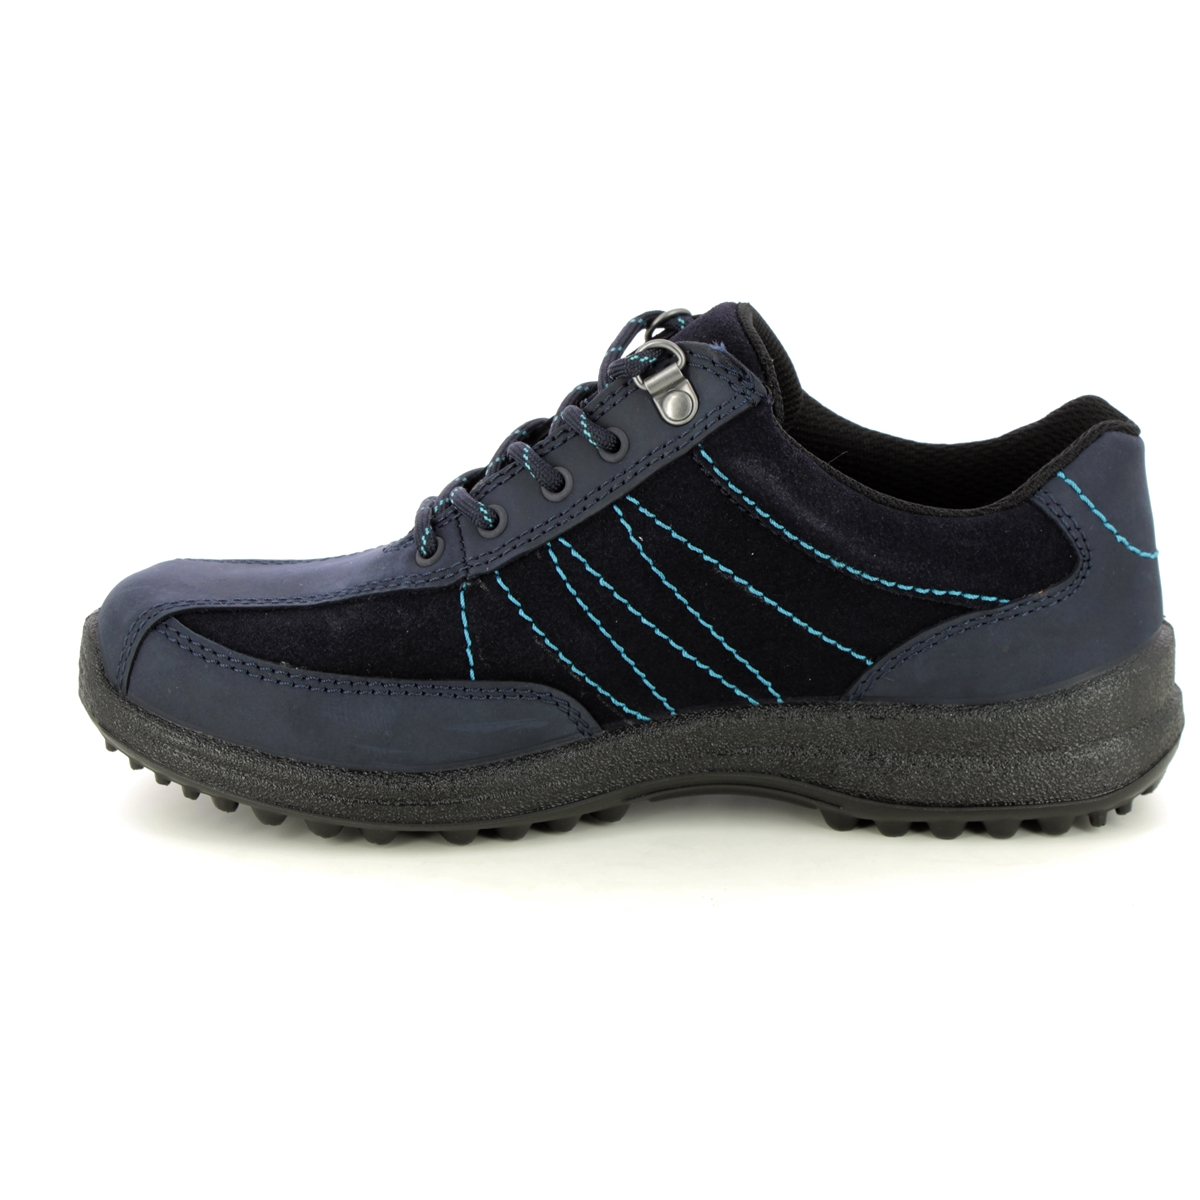 Hotter Mist Gtx Extra Wide Navy leather Womens Walking Shoes 17618-72